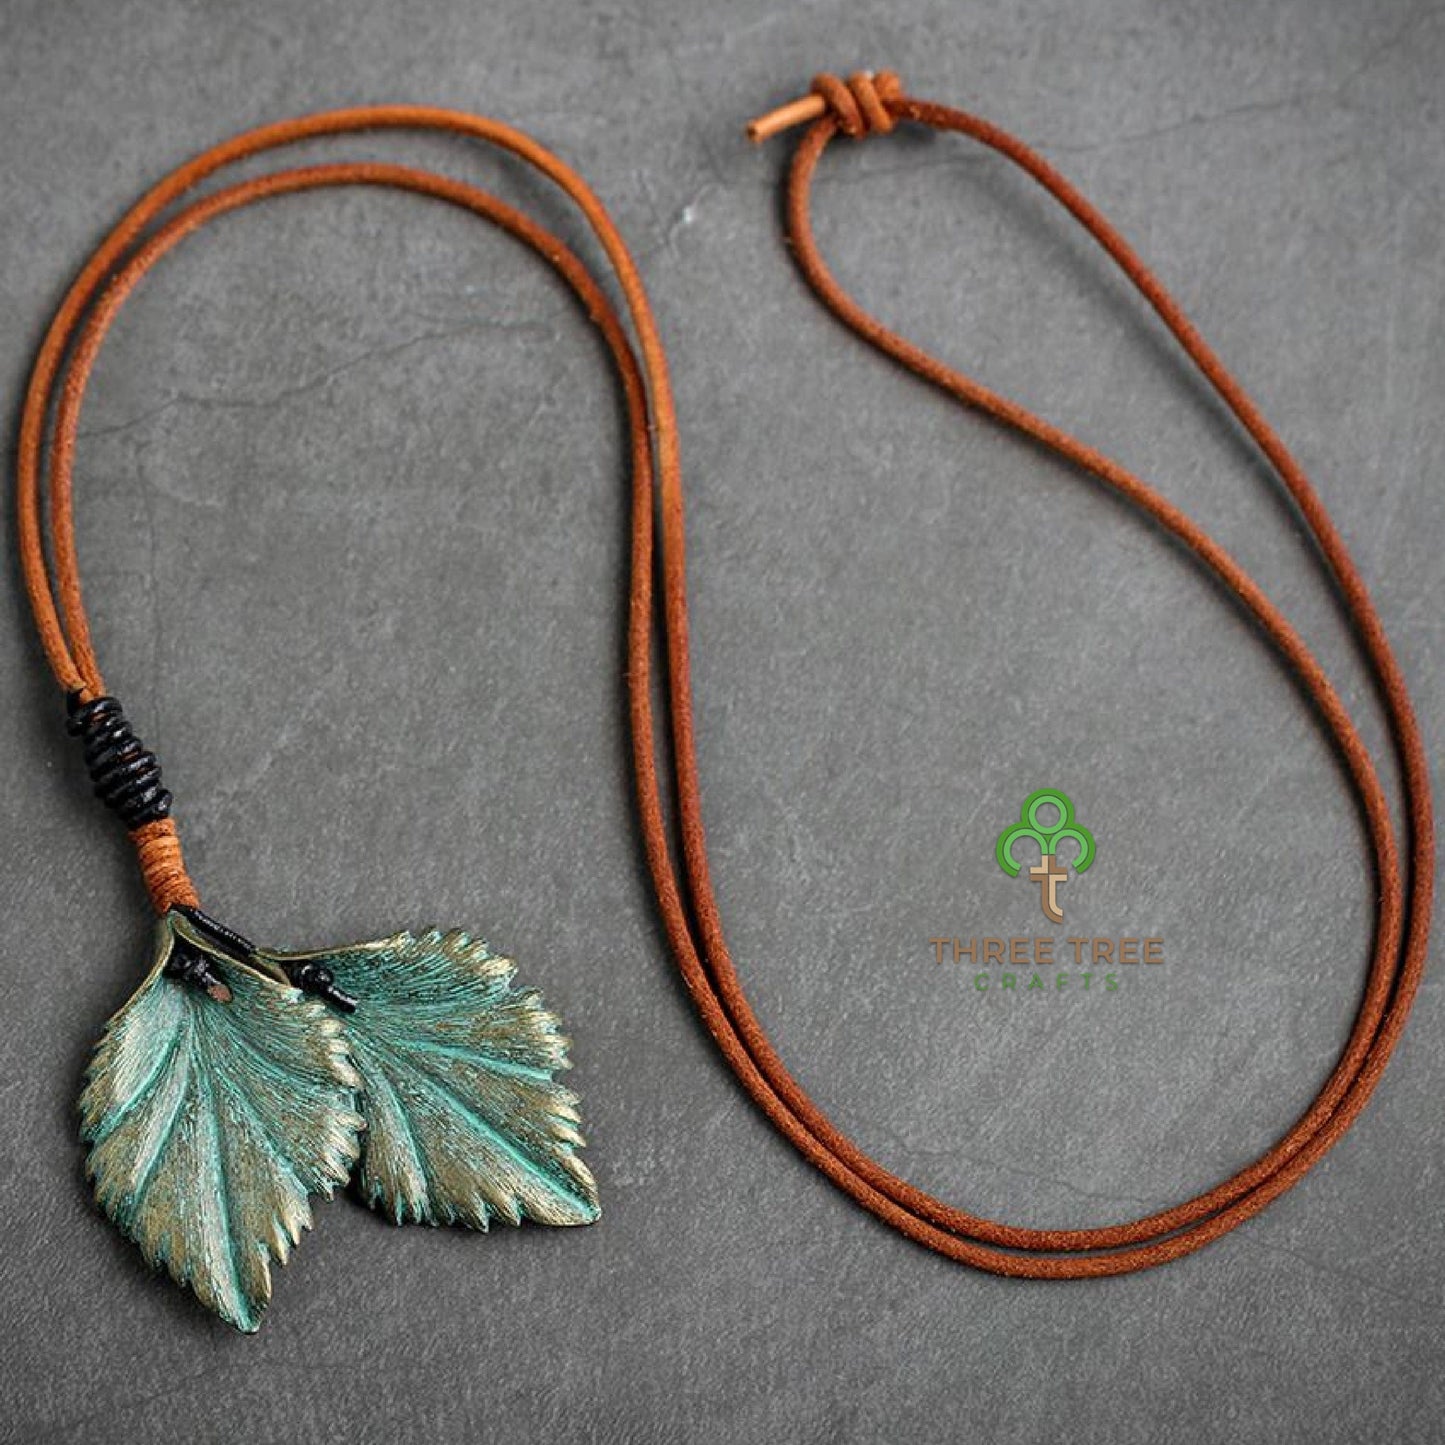 Three Tree Crafts Necklaces & Keychains Double Leaf Necklace